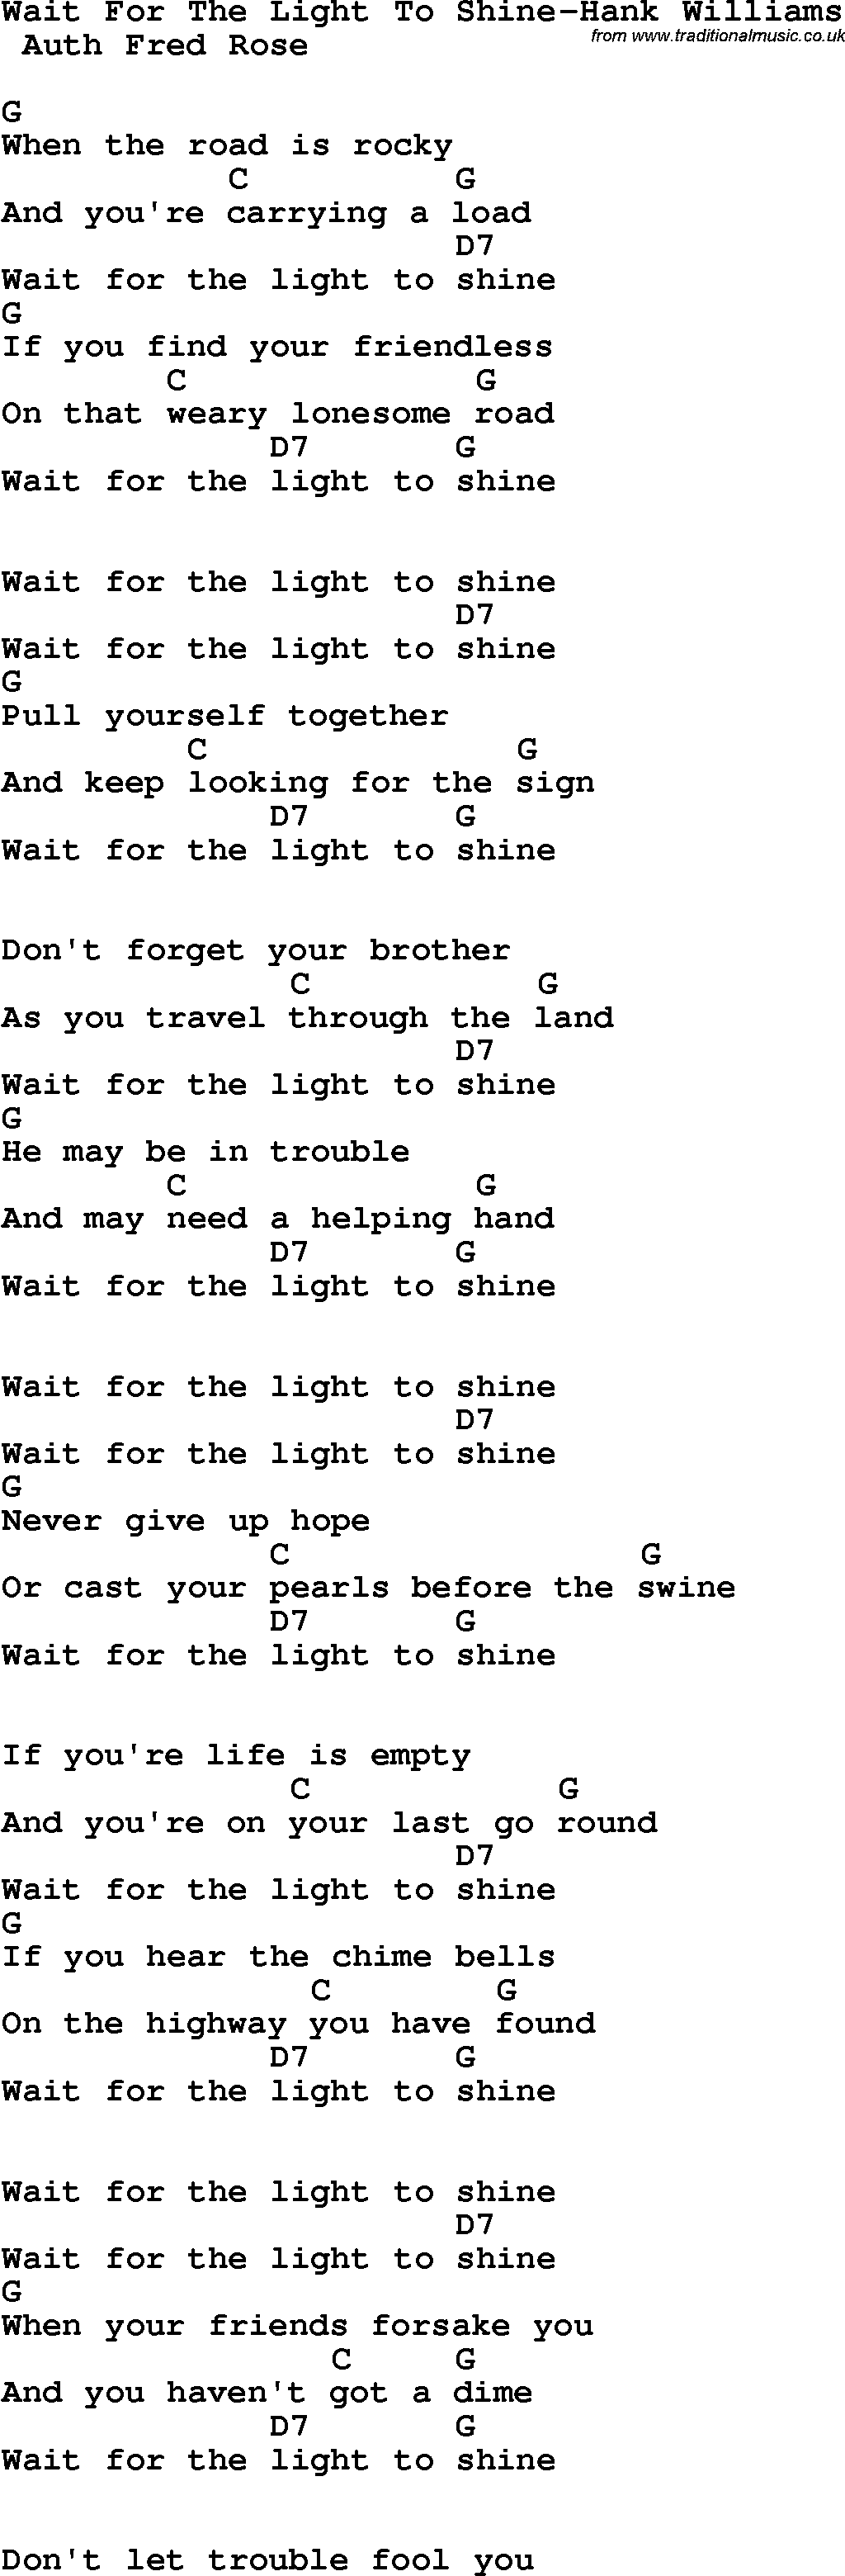 Country, Southern and Bluegrass Gospel Song Wait For The Light To Shine-Hank Williams lyrics and chords